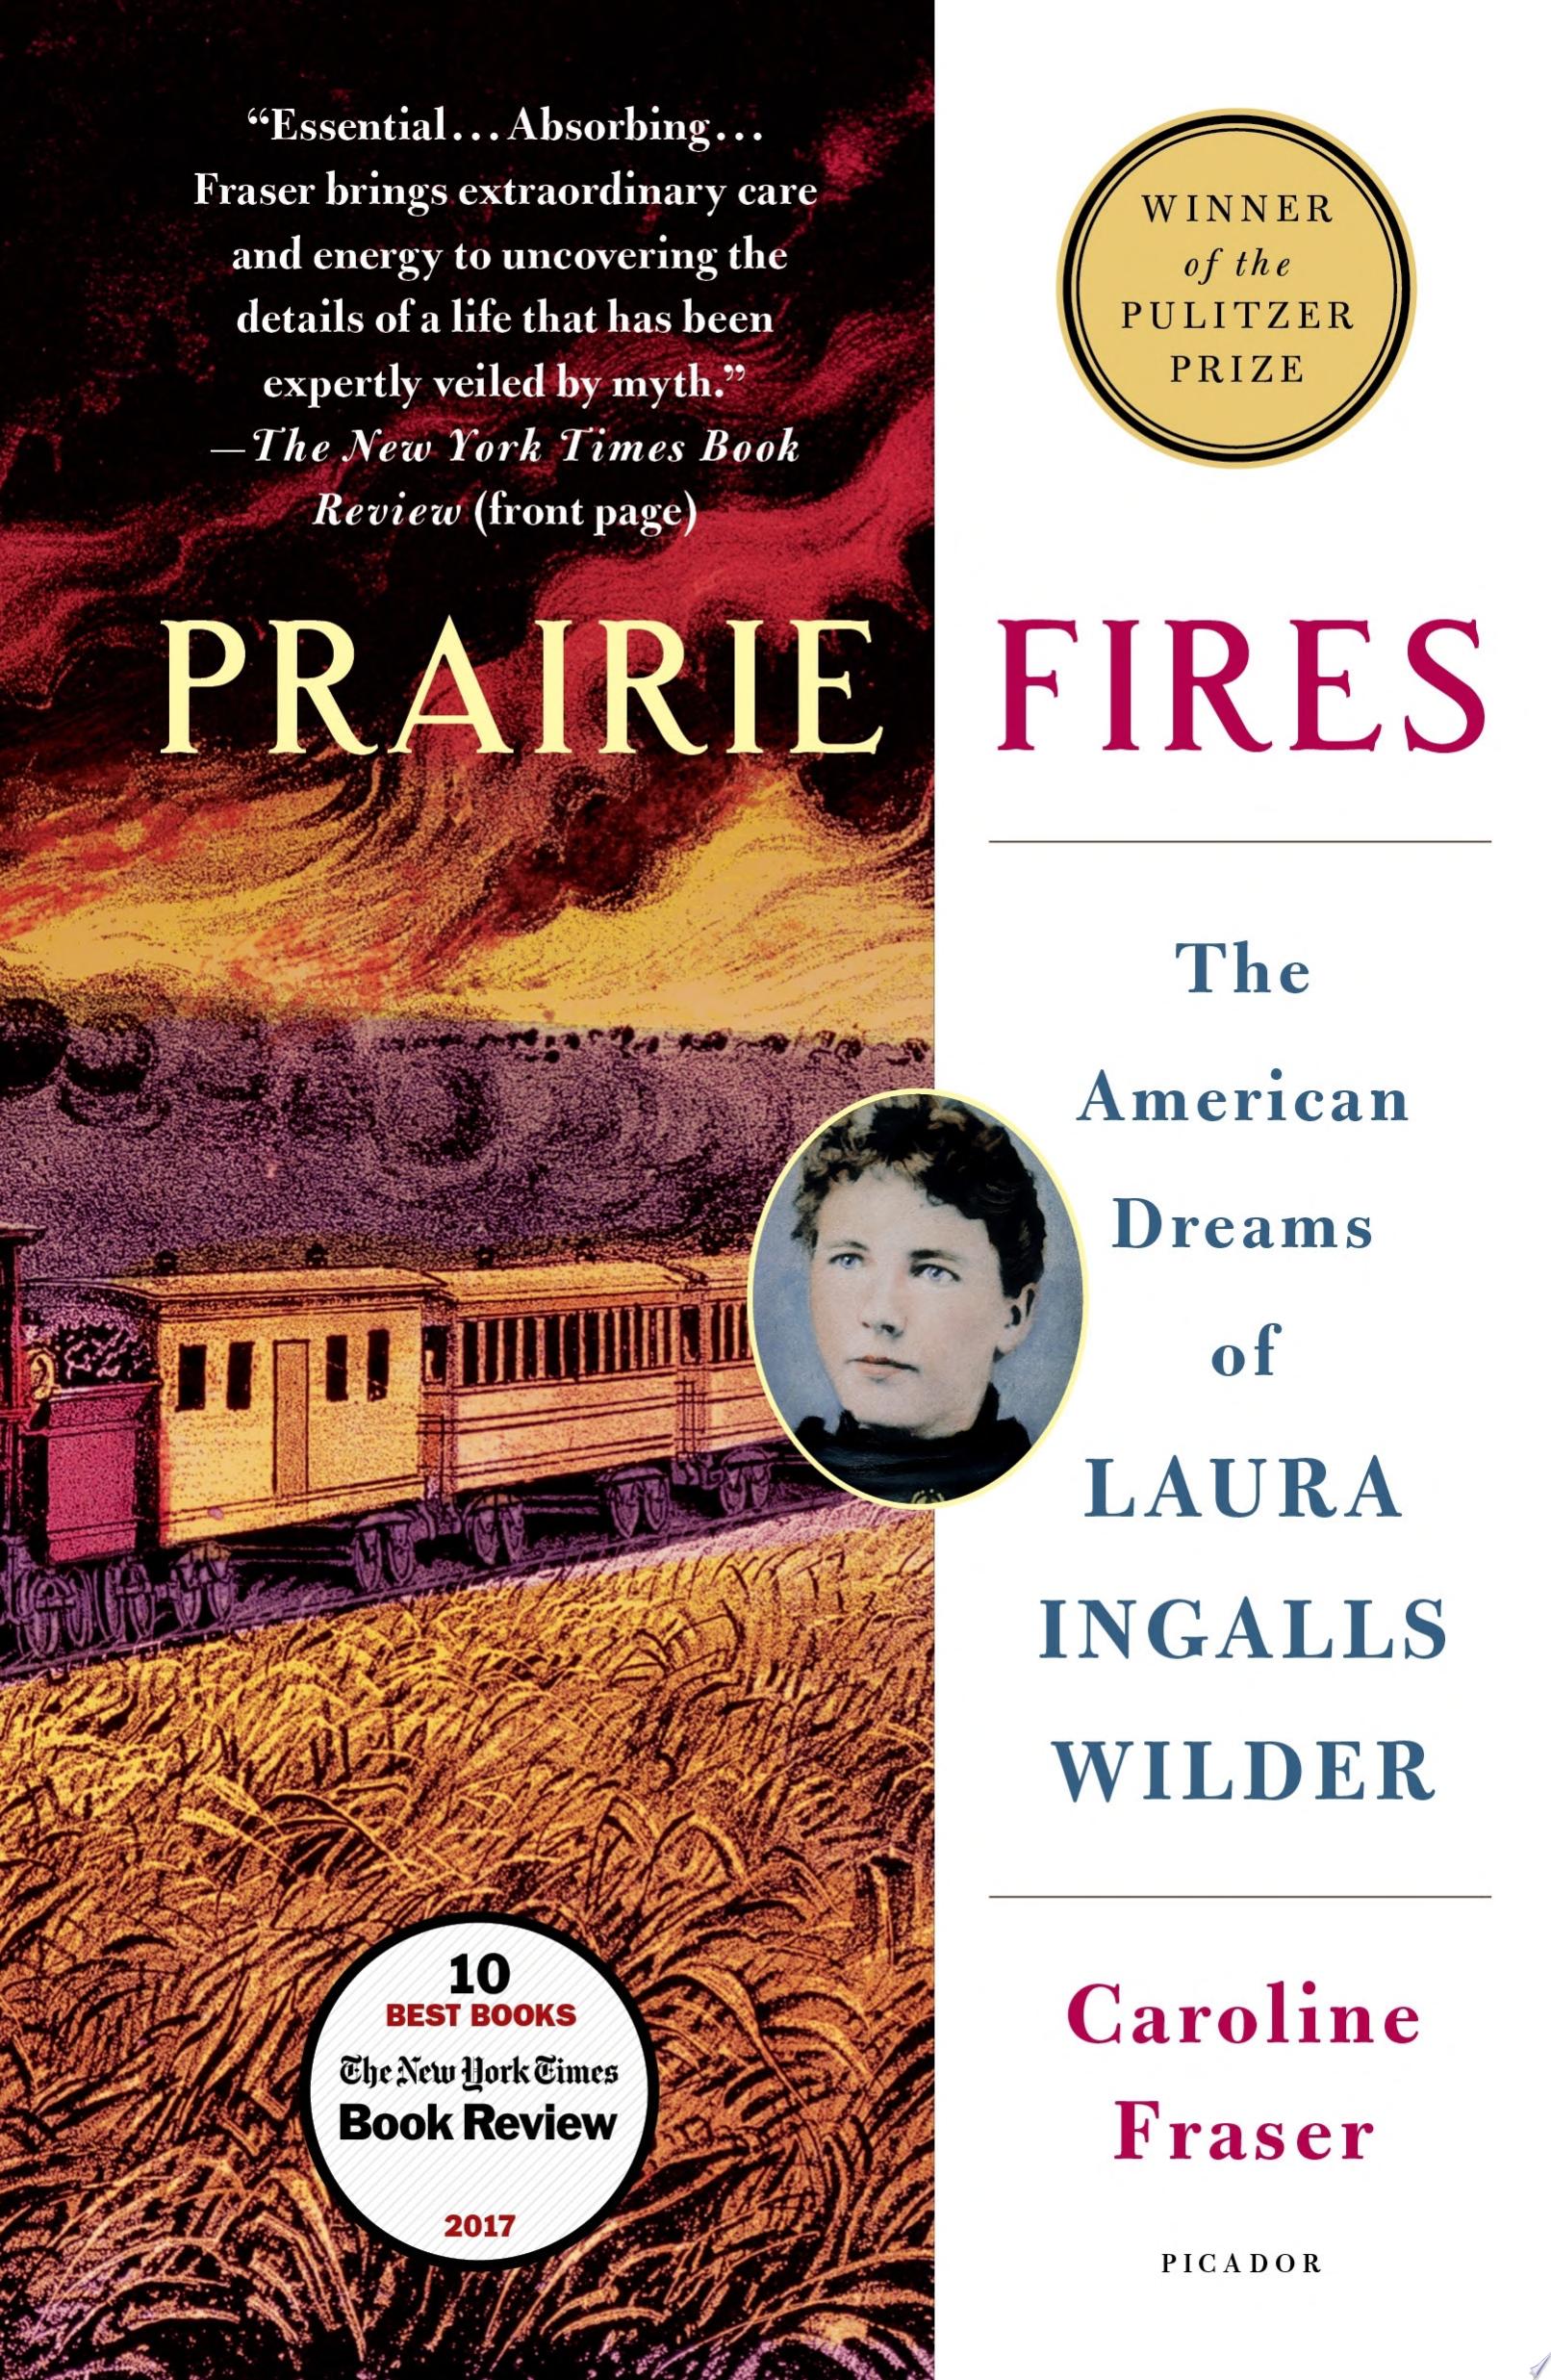 Image for "Prairie Fires"